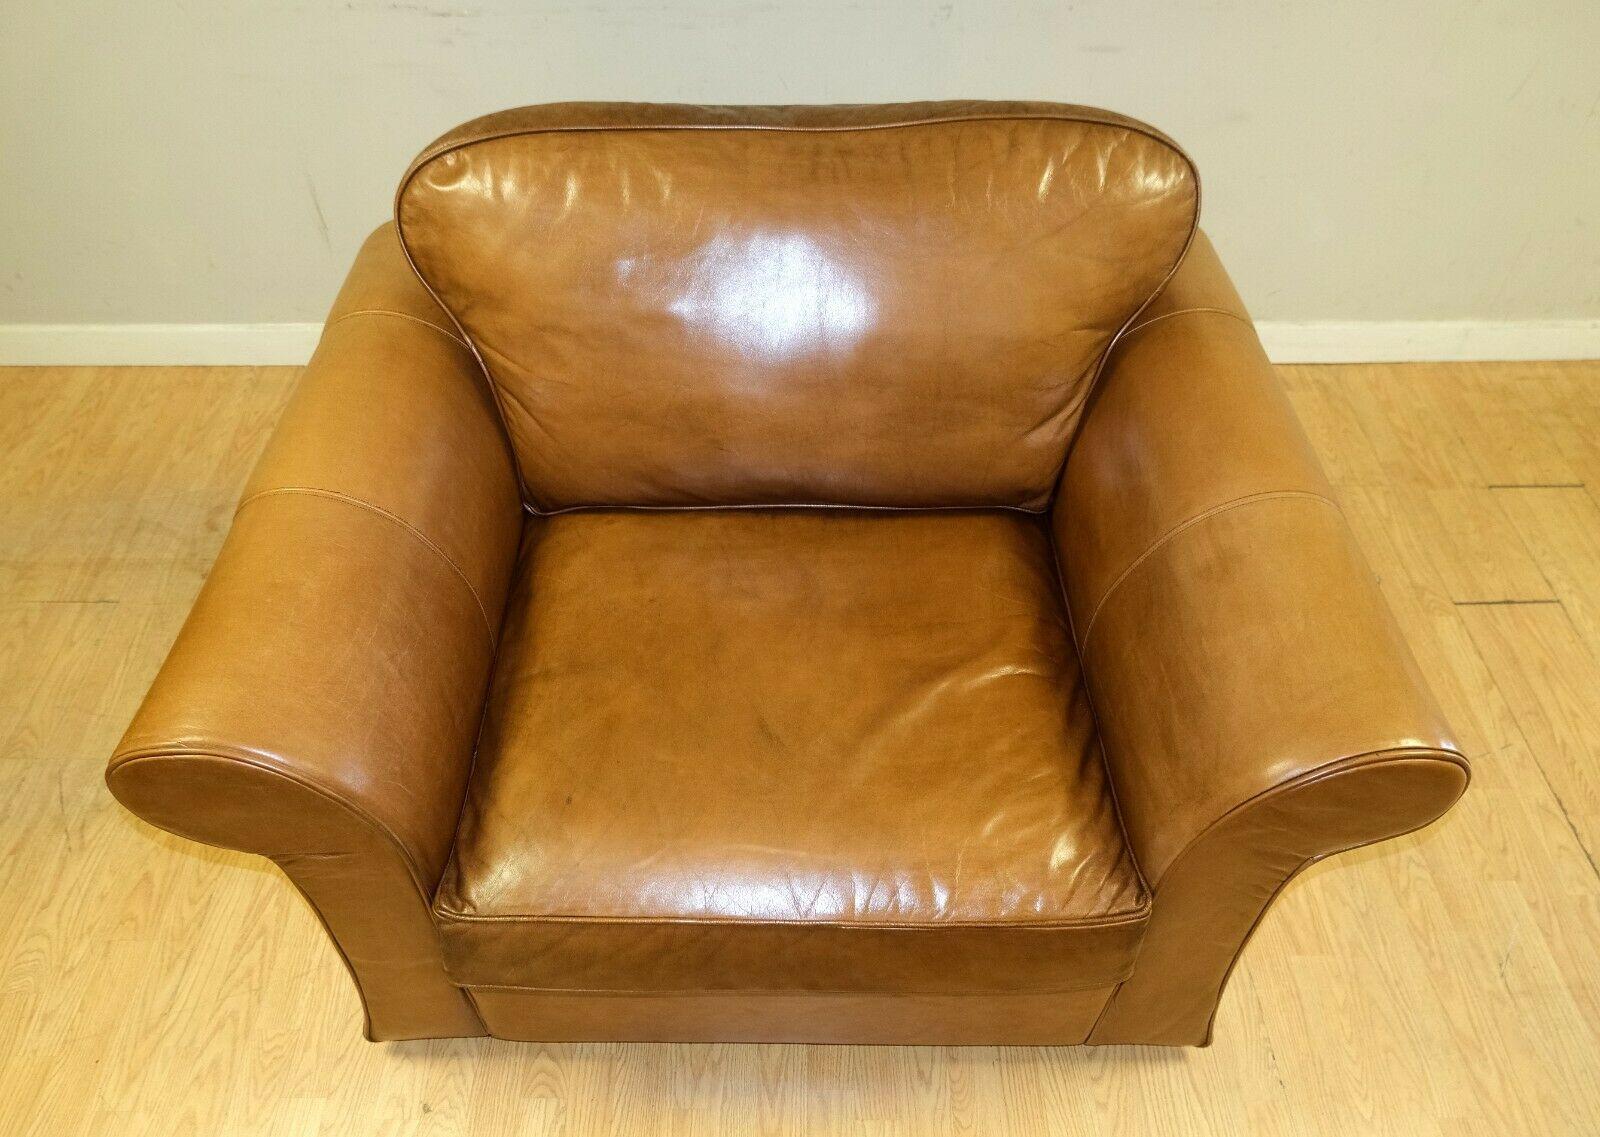 Hand-Crafted Stunning Tan Leather Armchair on Scroll Arms & Wooden Feet